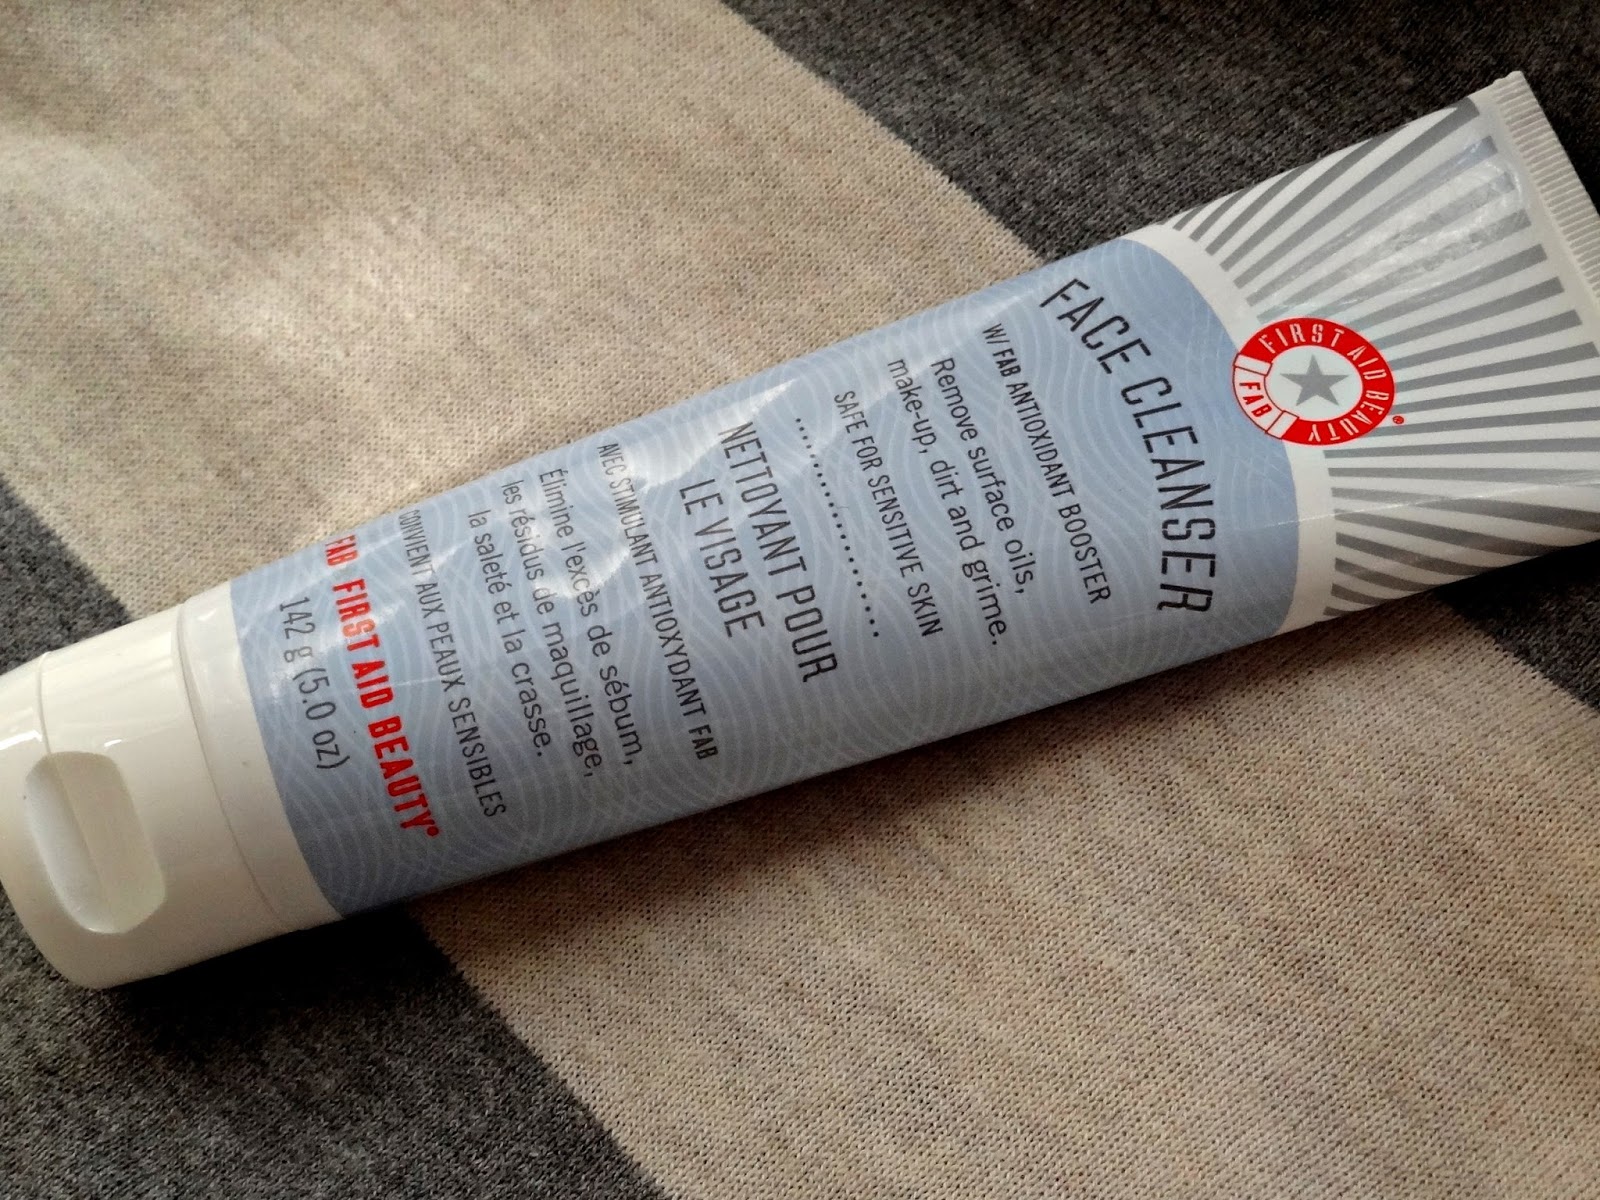 First Aid Beauty Facial Cleanser